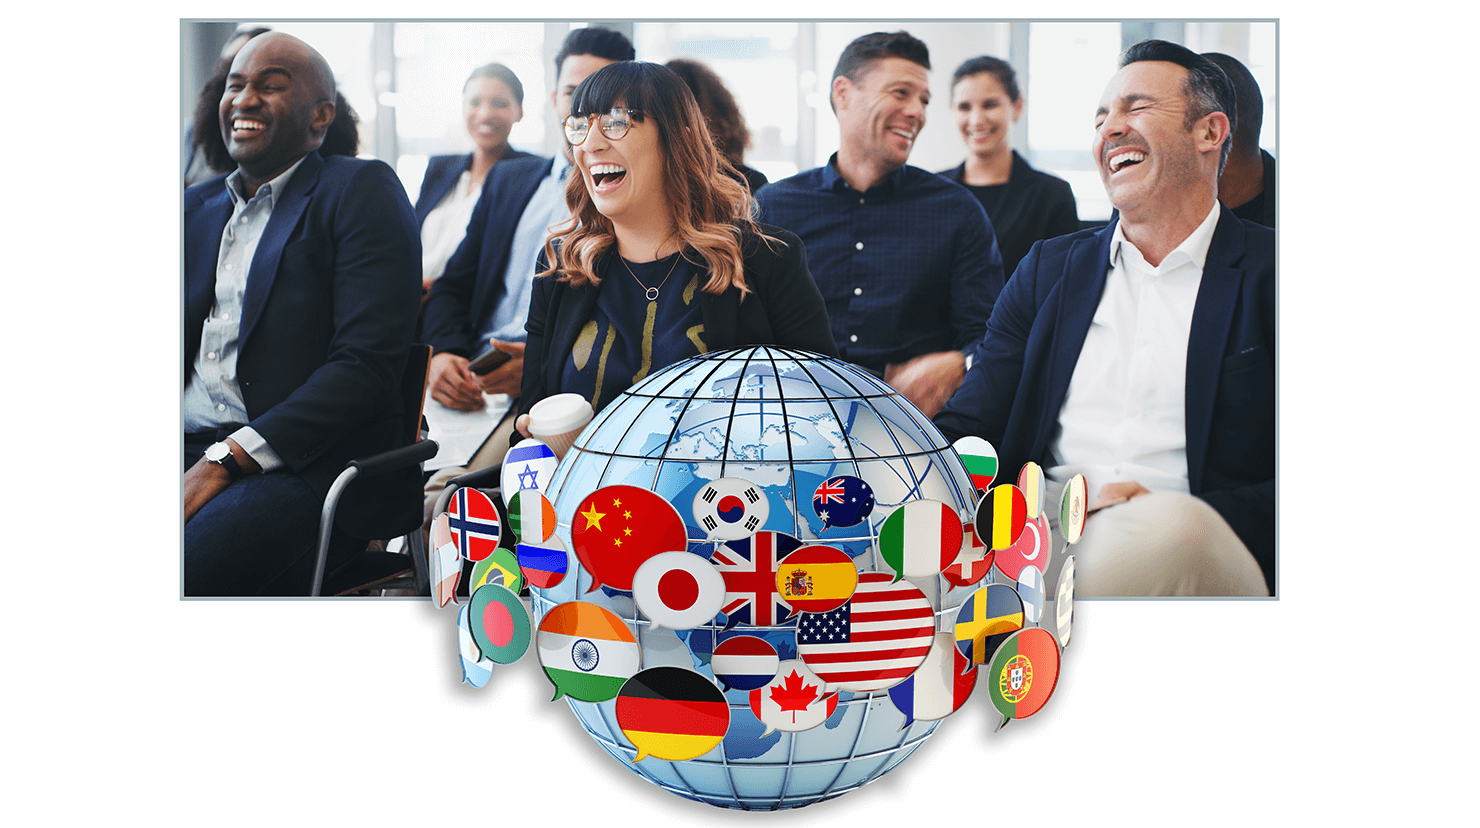 People in an audience laughing with globe image in forefront